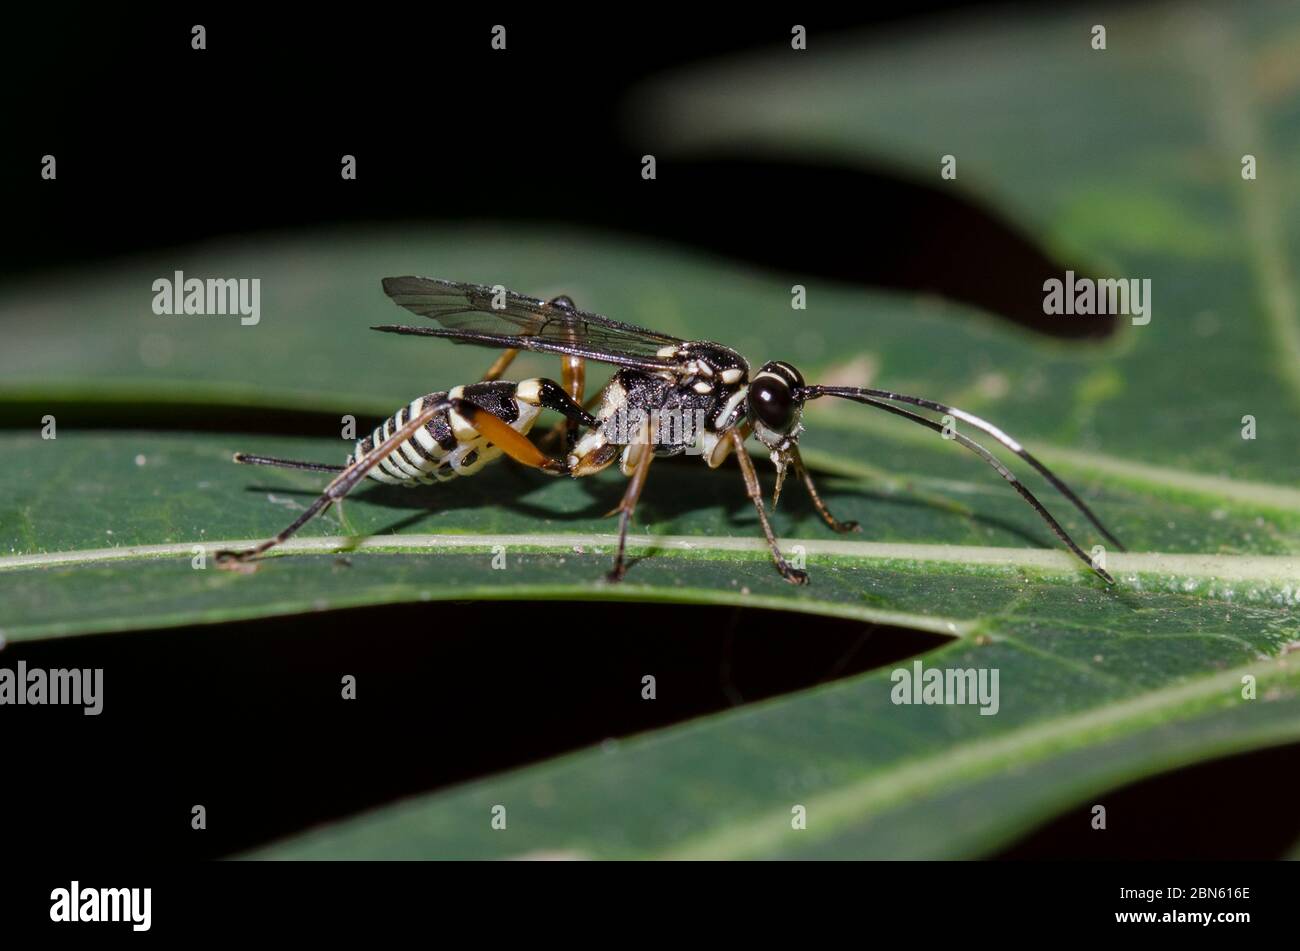 Darwin Wasp, Ichneumon promissorius, with ovipositor on leaf, Klungkung, Bali, Indonesia Stock Photo